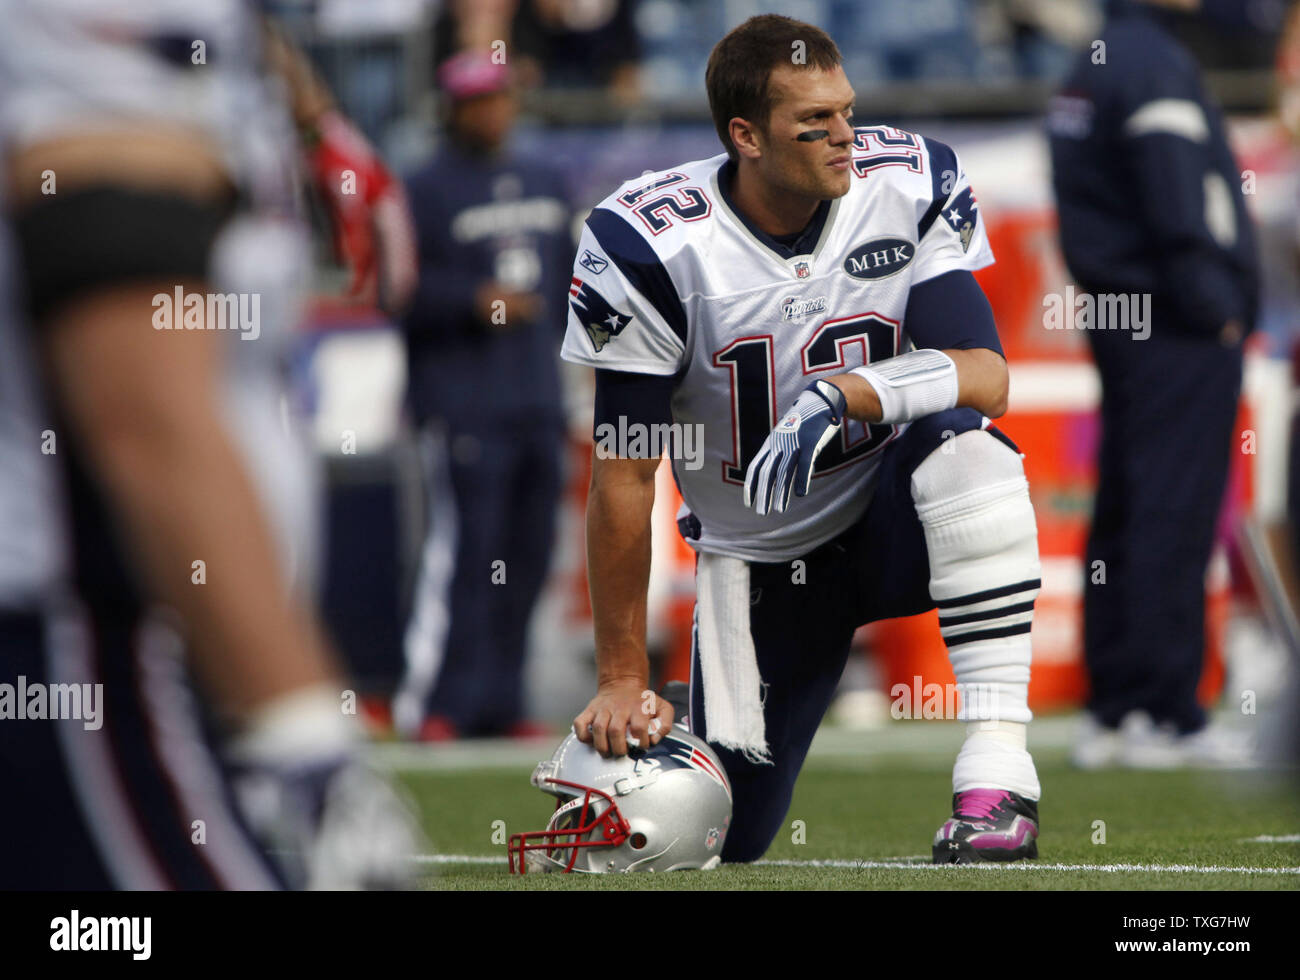 New England Patriots quarterback Tom Brady stretches with teammates before taking on the Dallas Cowboys at Gillette Stadium in Foxboro, Massachusetts on October 16, 2011.    UPI/Matthew Healey Stock Photo